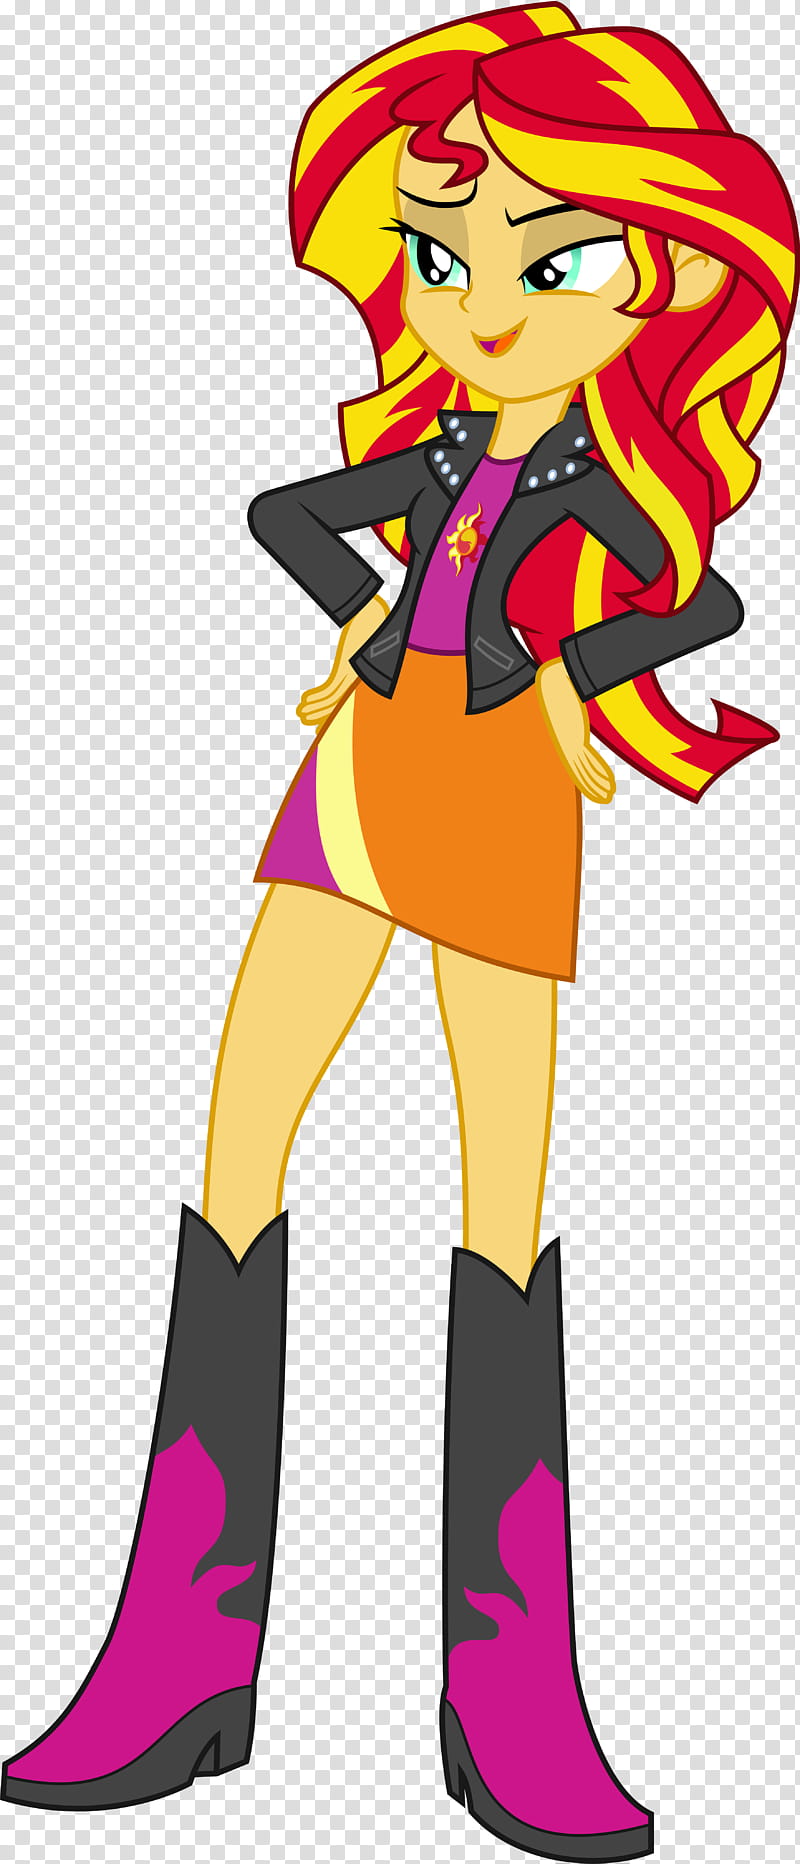 My Little Pony Equestria Girls Sunset Shimmer Cosplay Costume